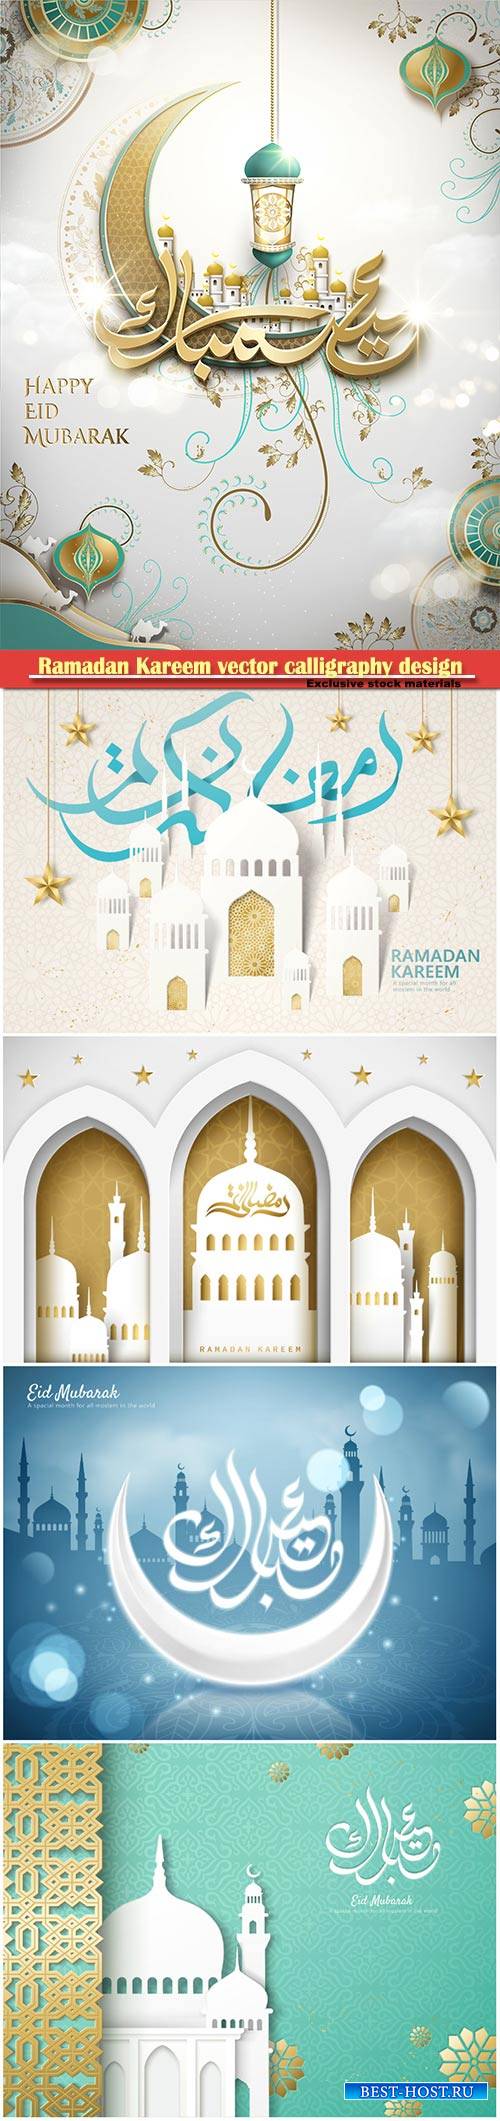 Ramadan Kareem vector calligraphy design with decorative floral pattern,mosque silhouette, crescent and glittering islamic background # 13